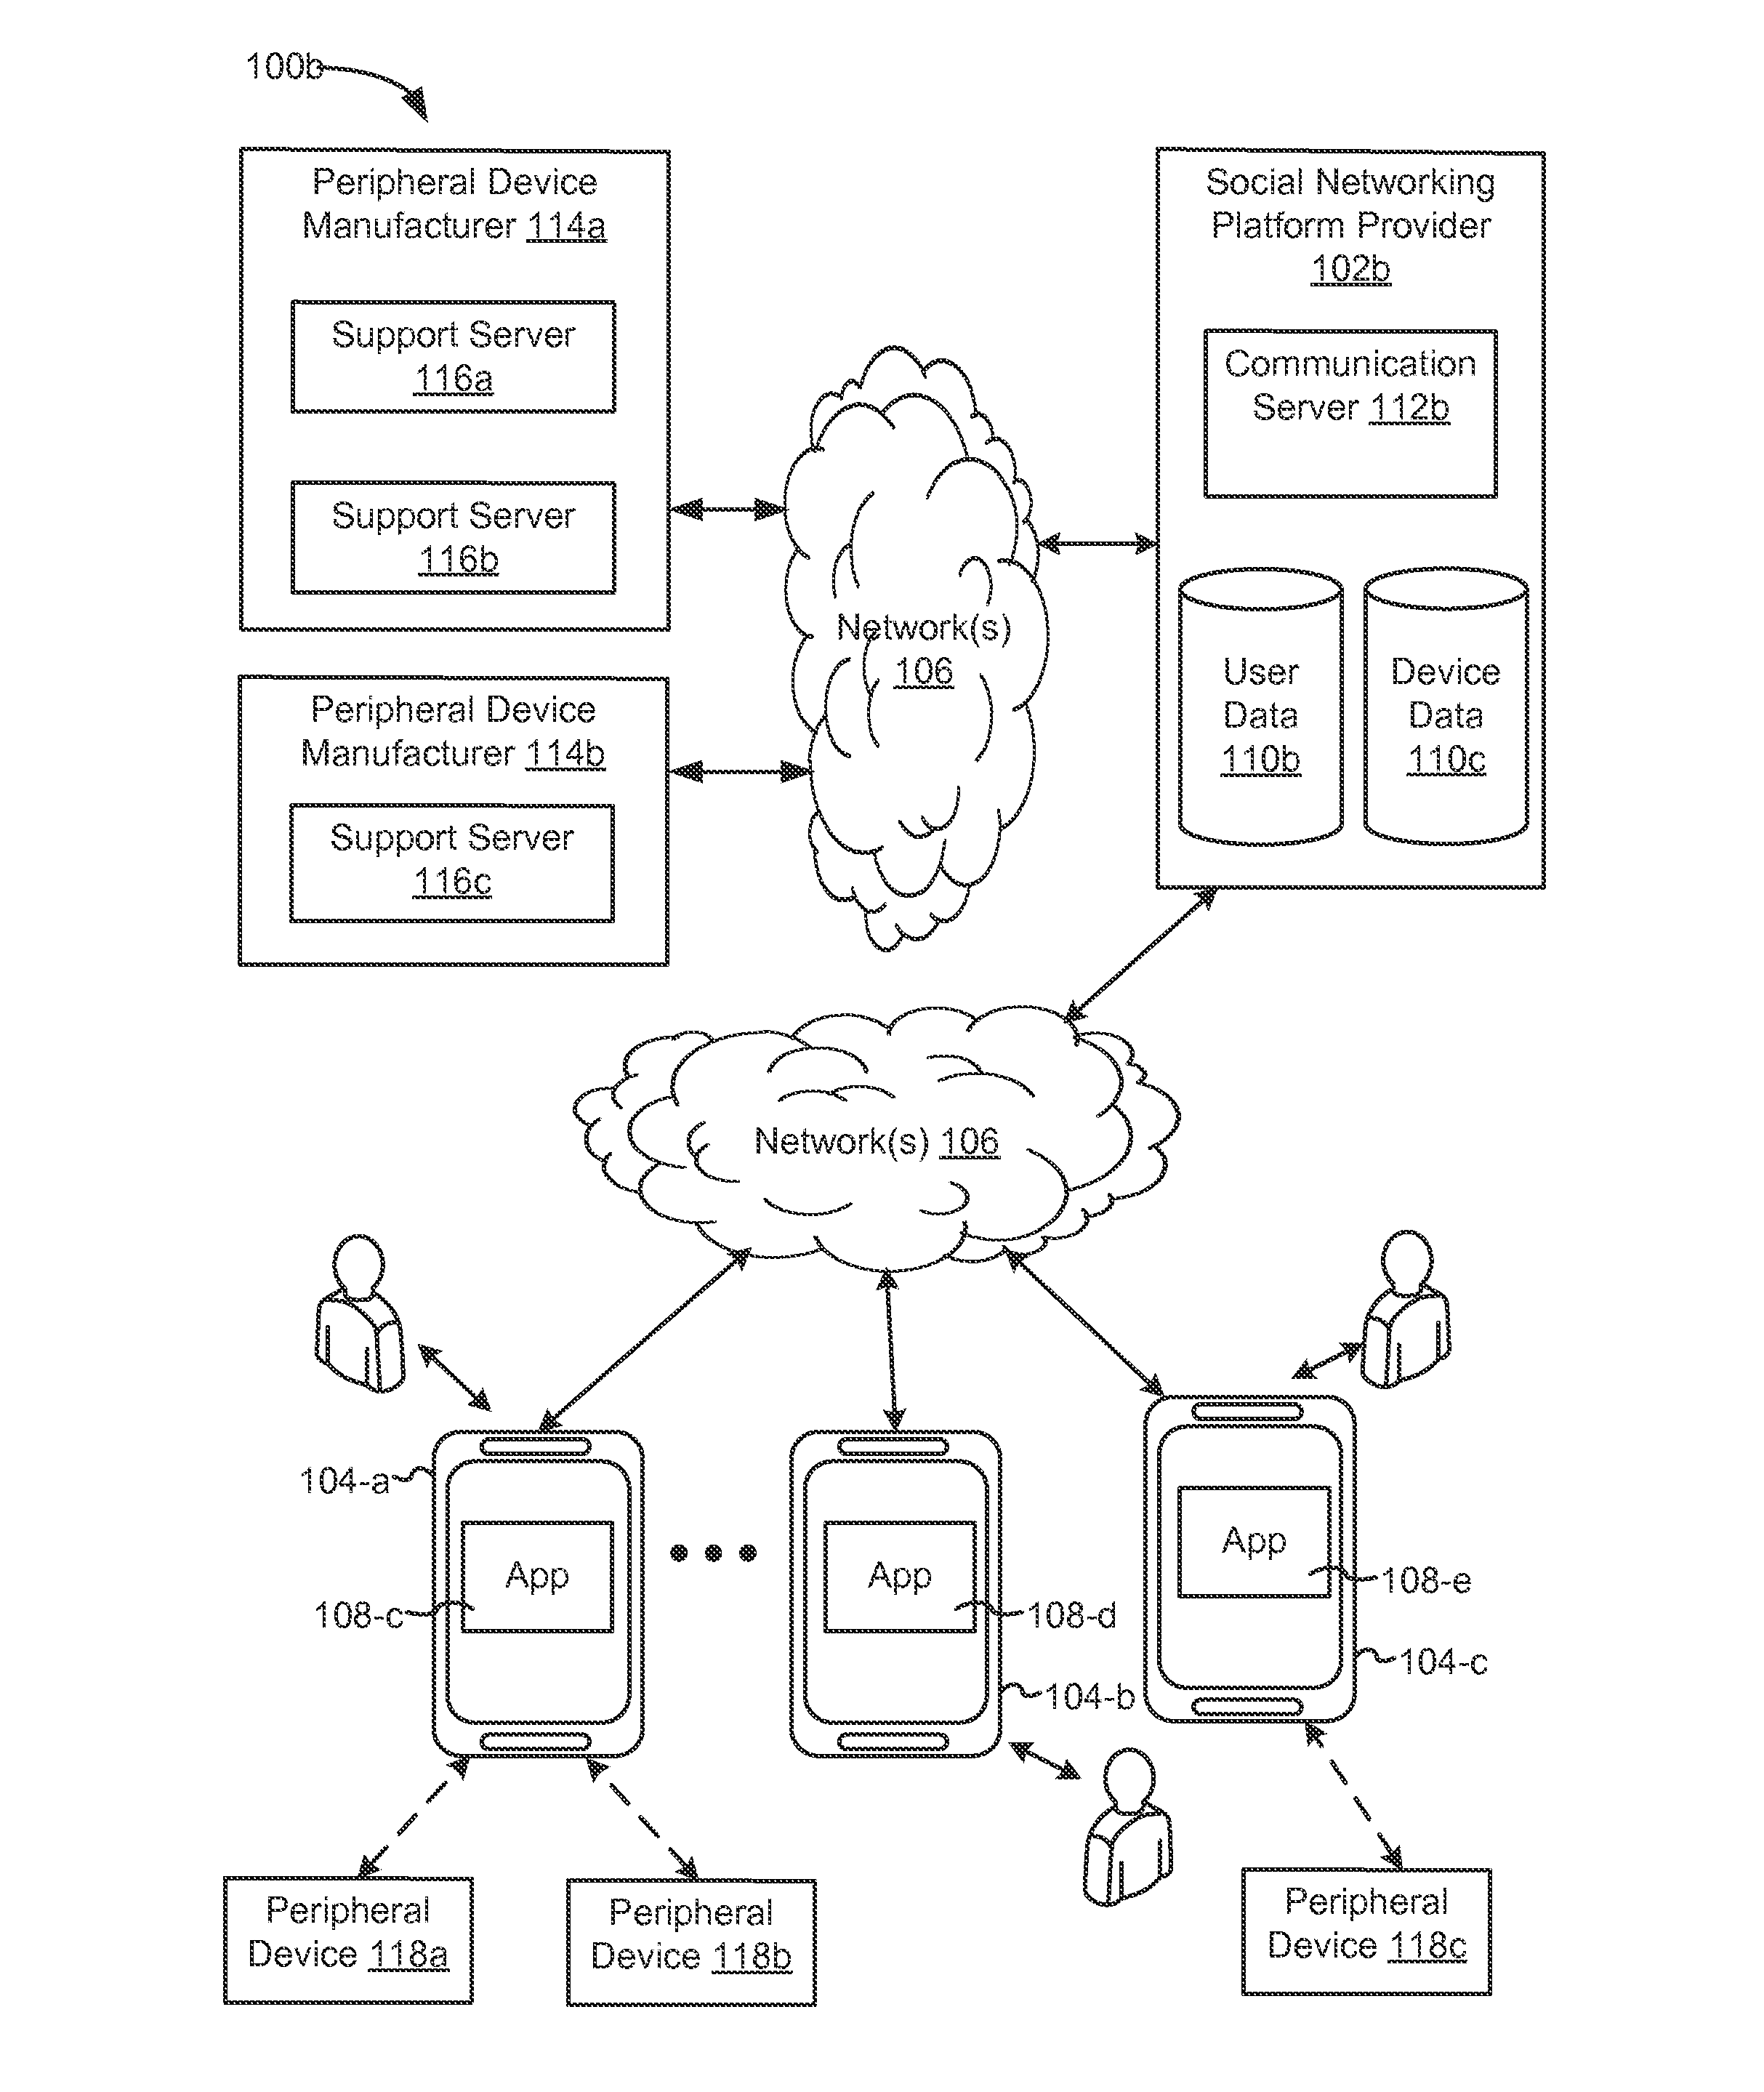 Method and device for controlling peripheral devices via a social networking platform